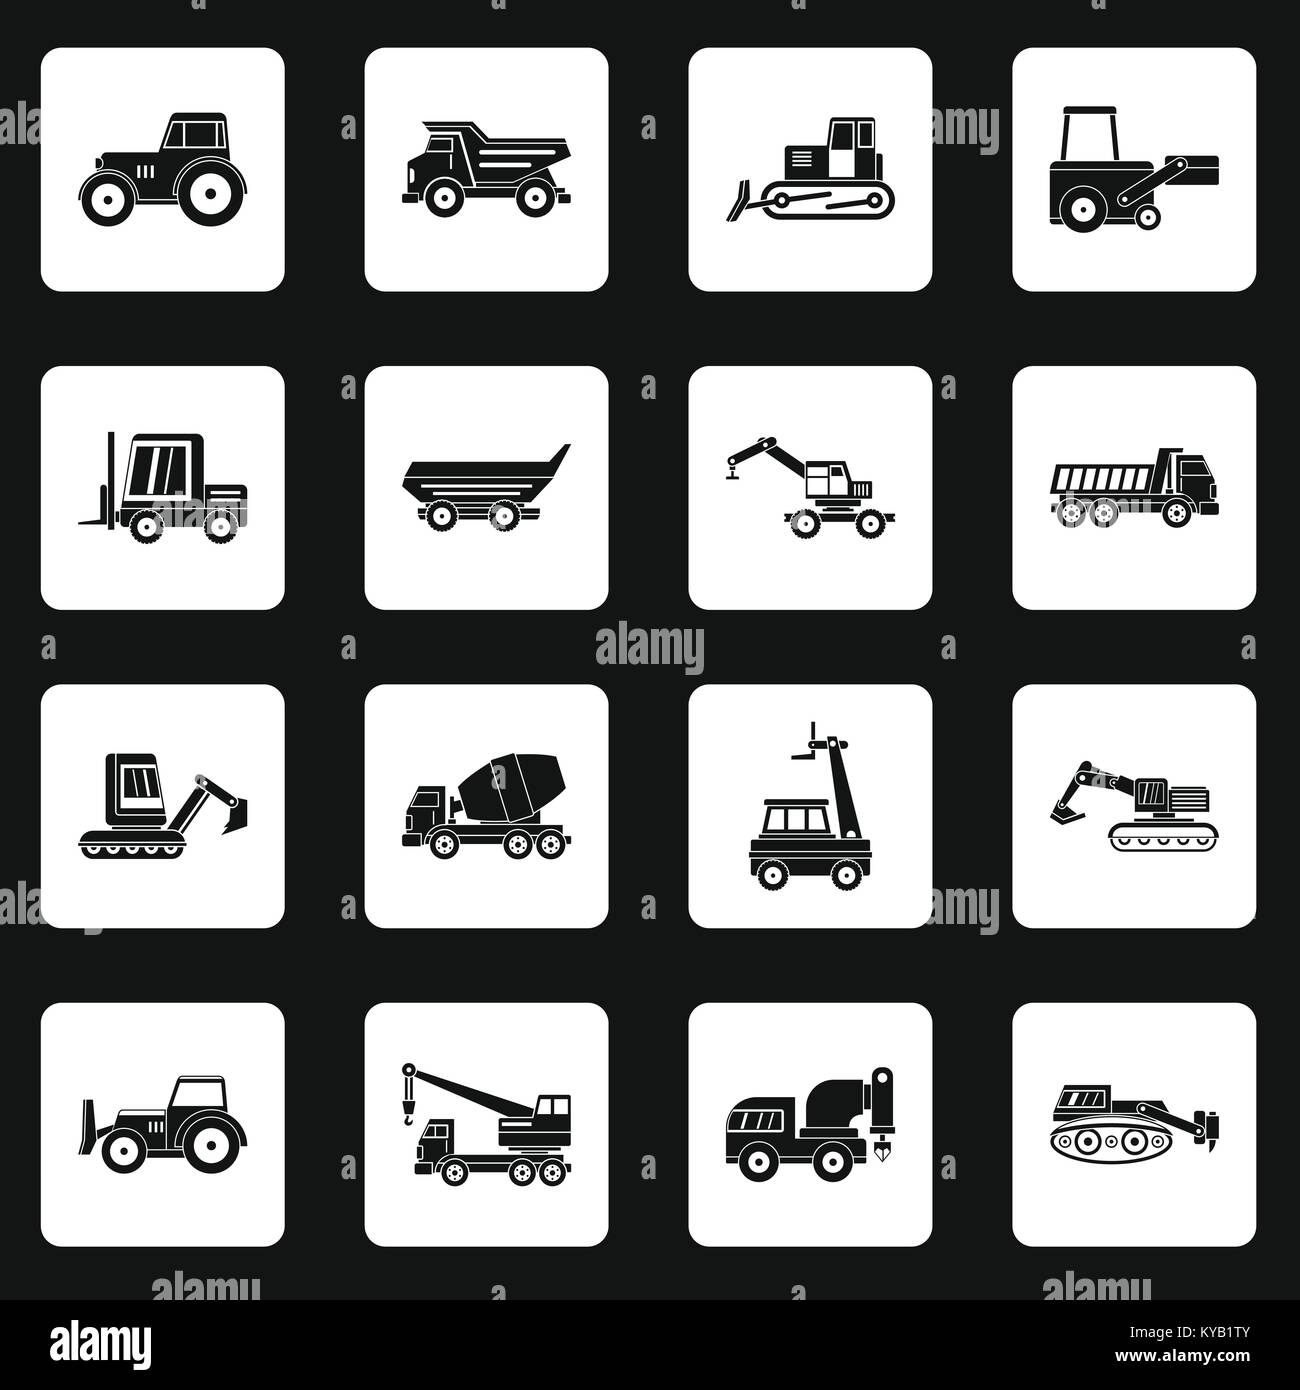 Building vehicles icons set in white squares on black background simple style vector illustration Stock Vector